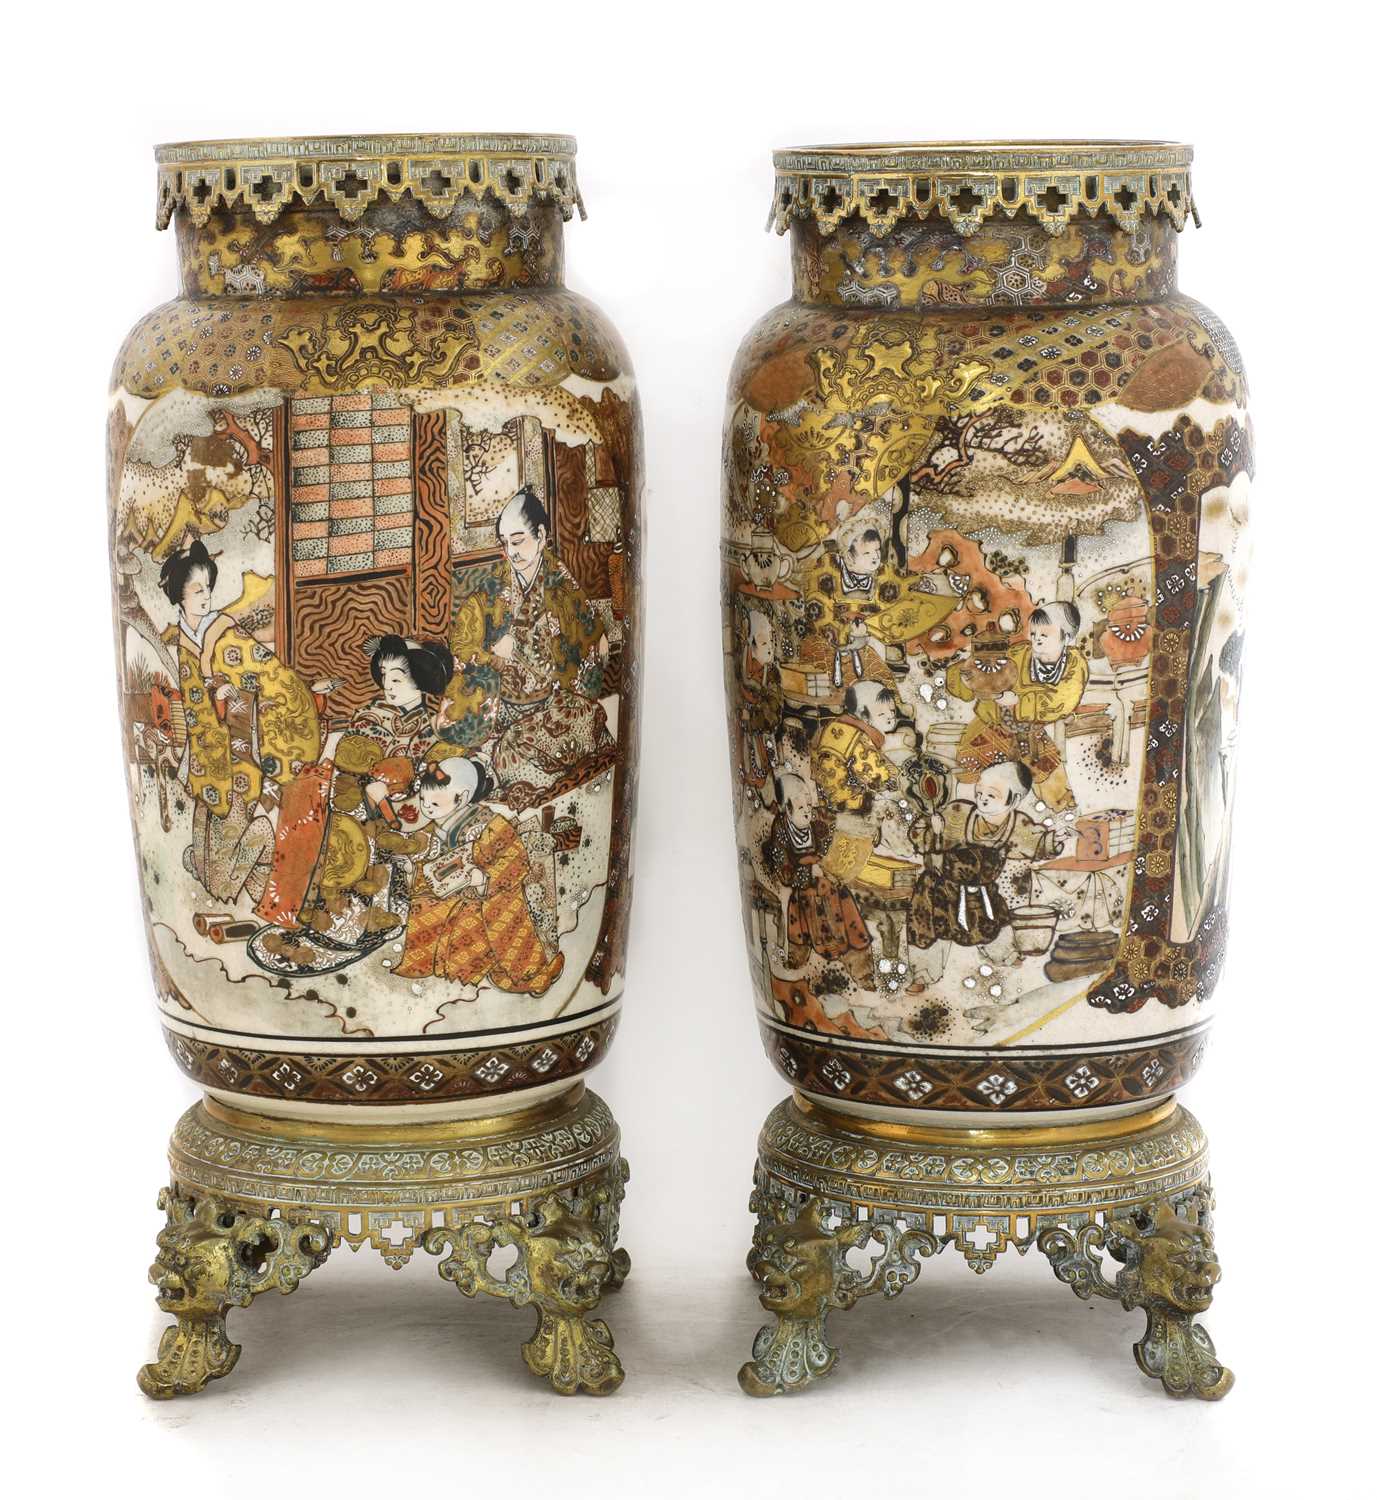 Lot 26 - A pair of large Satsuma and gilt-metal mounted vases